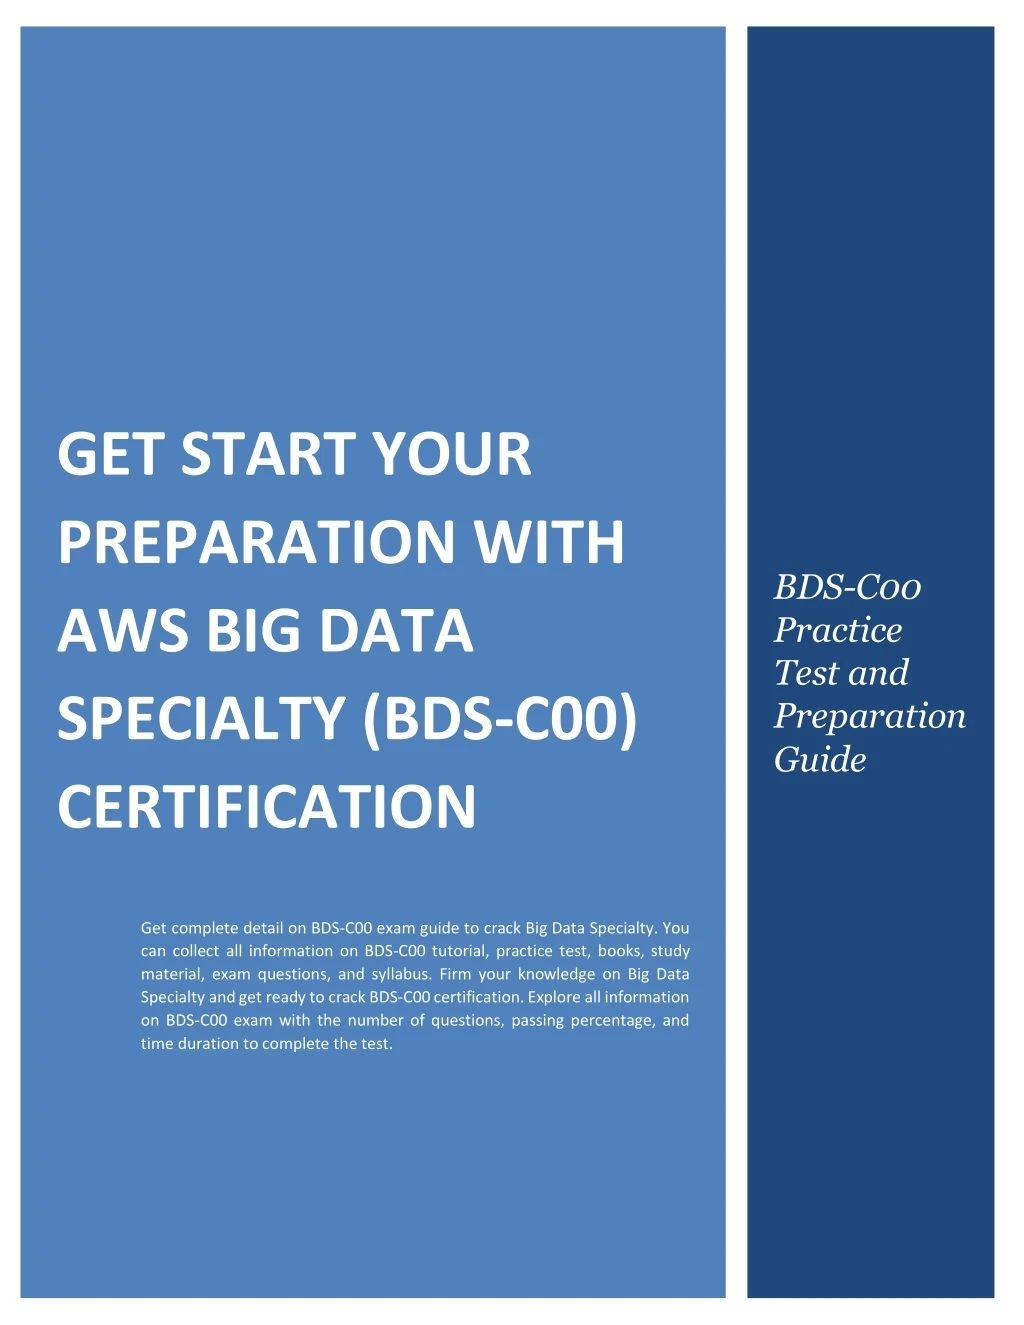 get start your preparation with aws big data